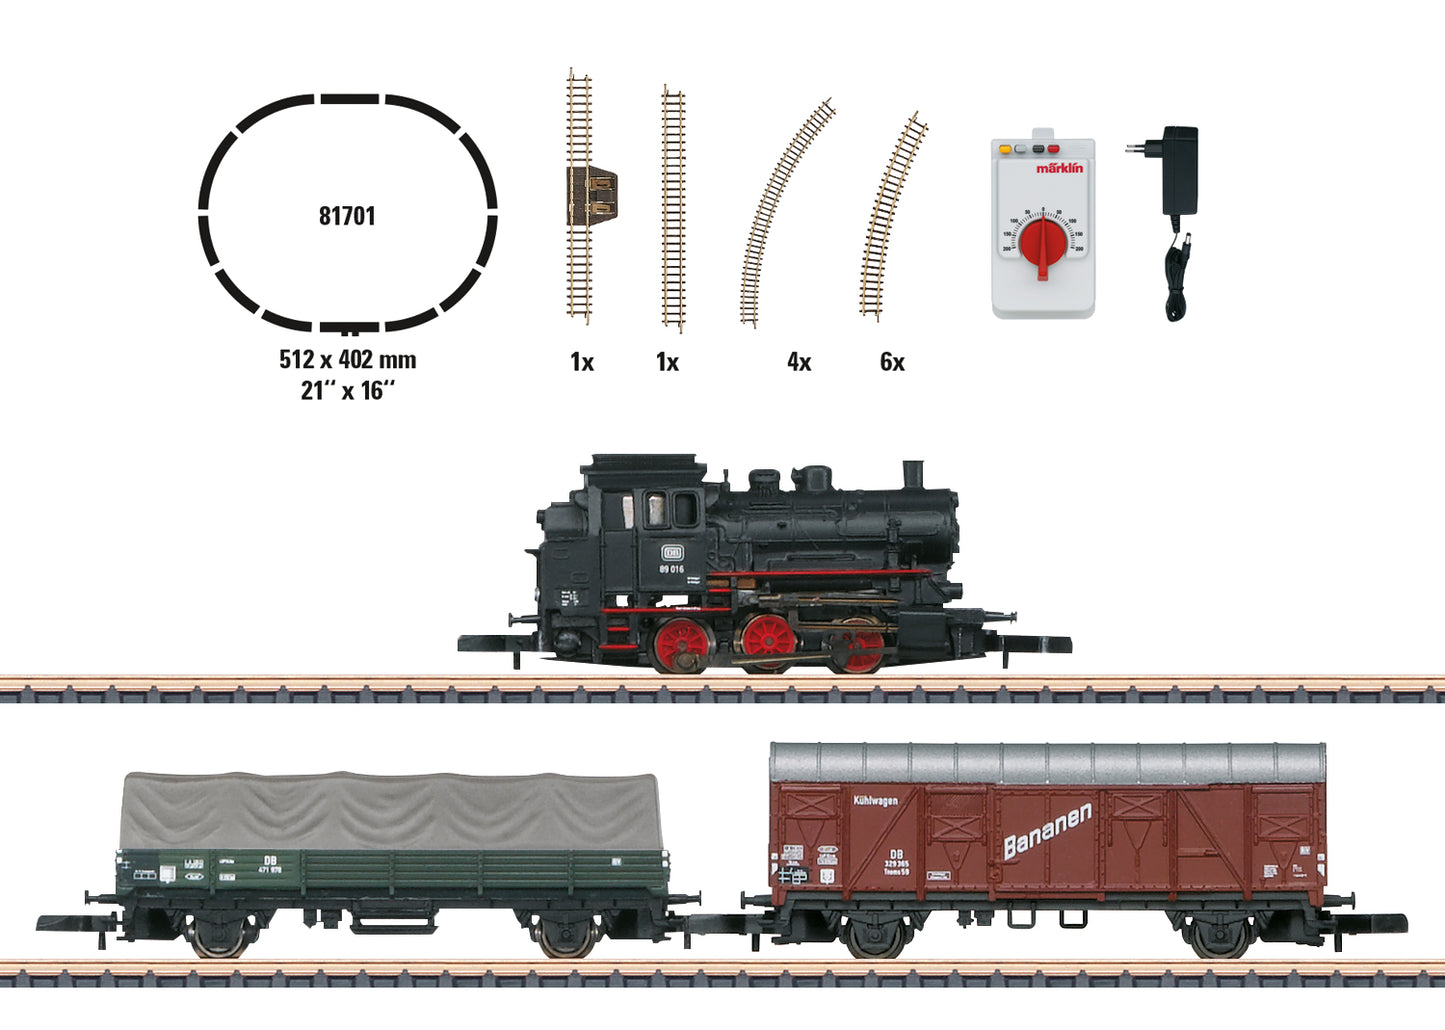 Marklin 81701 - Starter Set. Freight Train with an Oval of Track at Ajckids.com